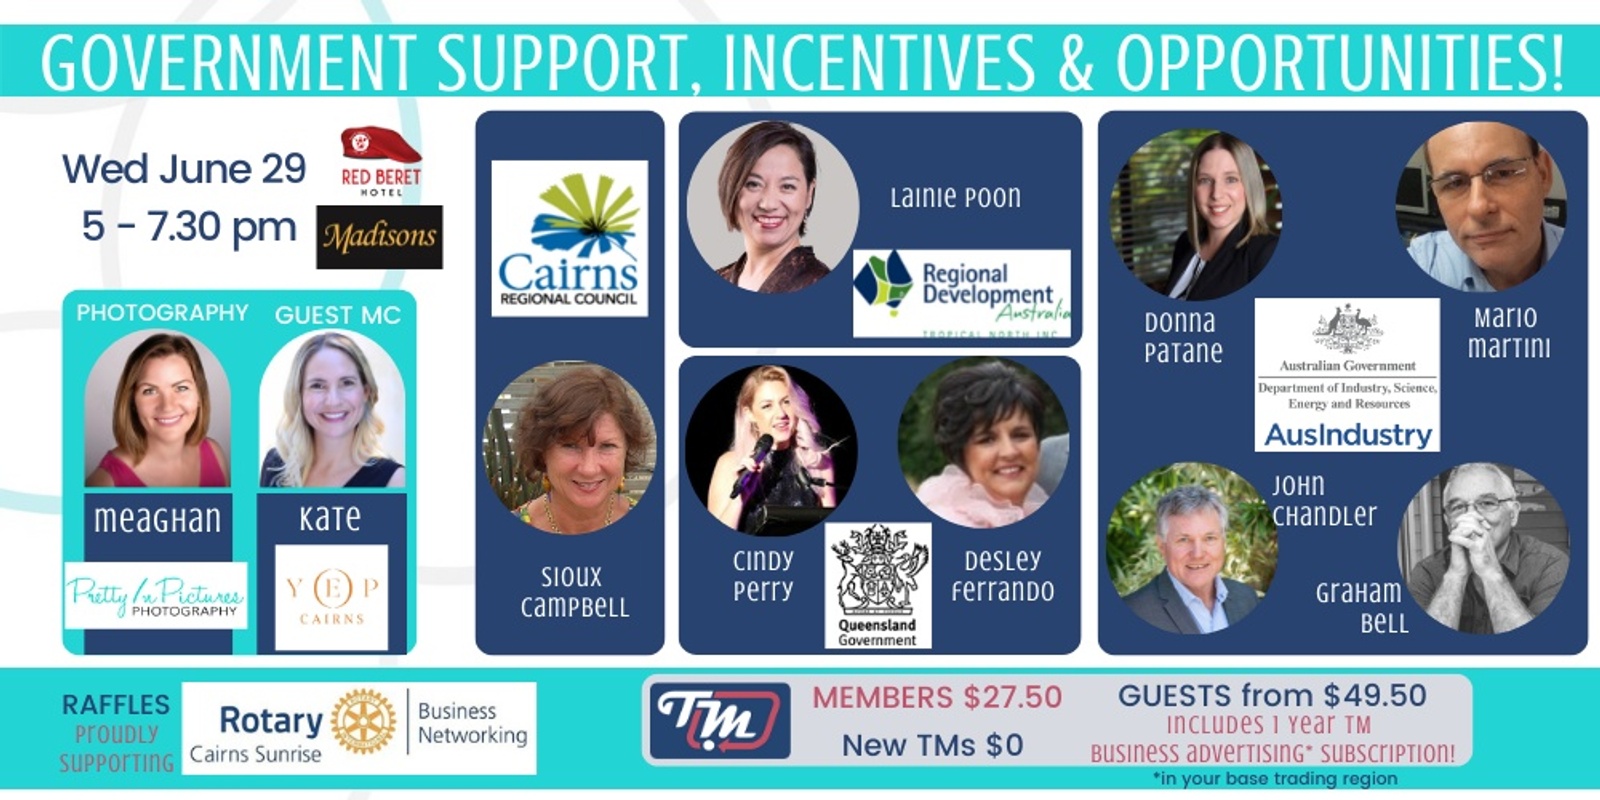 Support, Incentives & Opportunities!